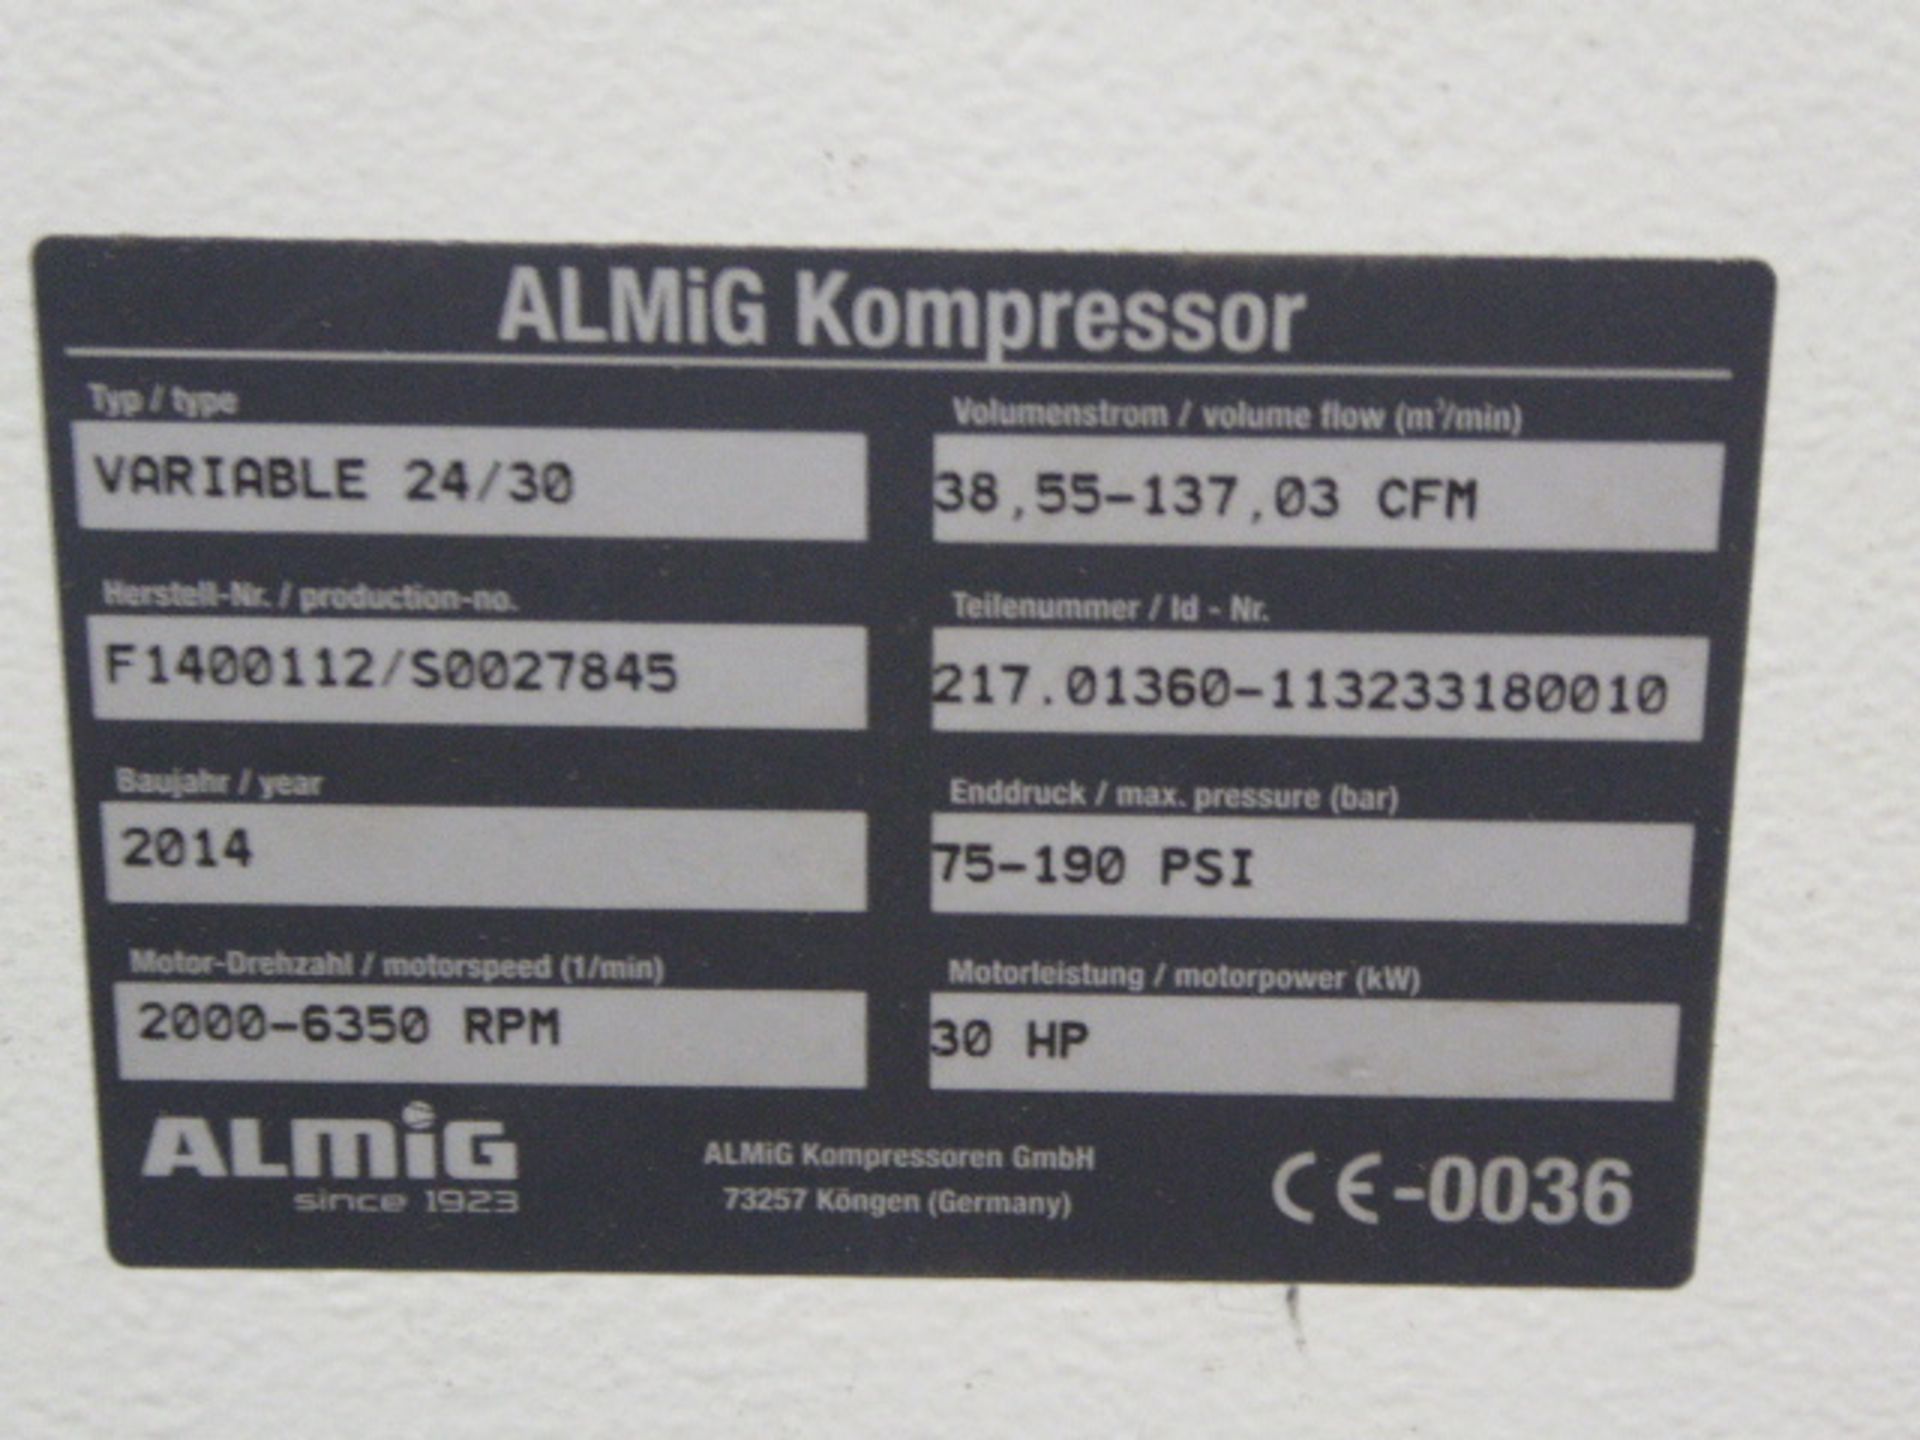 2014 Almig Air Compressor w/Shed, 30-HP, m/n Variable 24/30, s/n F1400112/S0027845 - Image 3 of 6